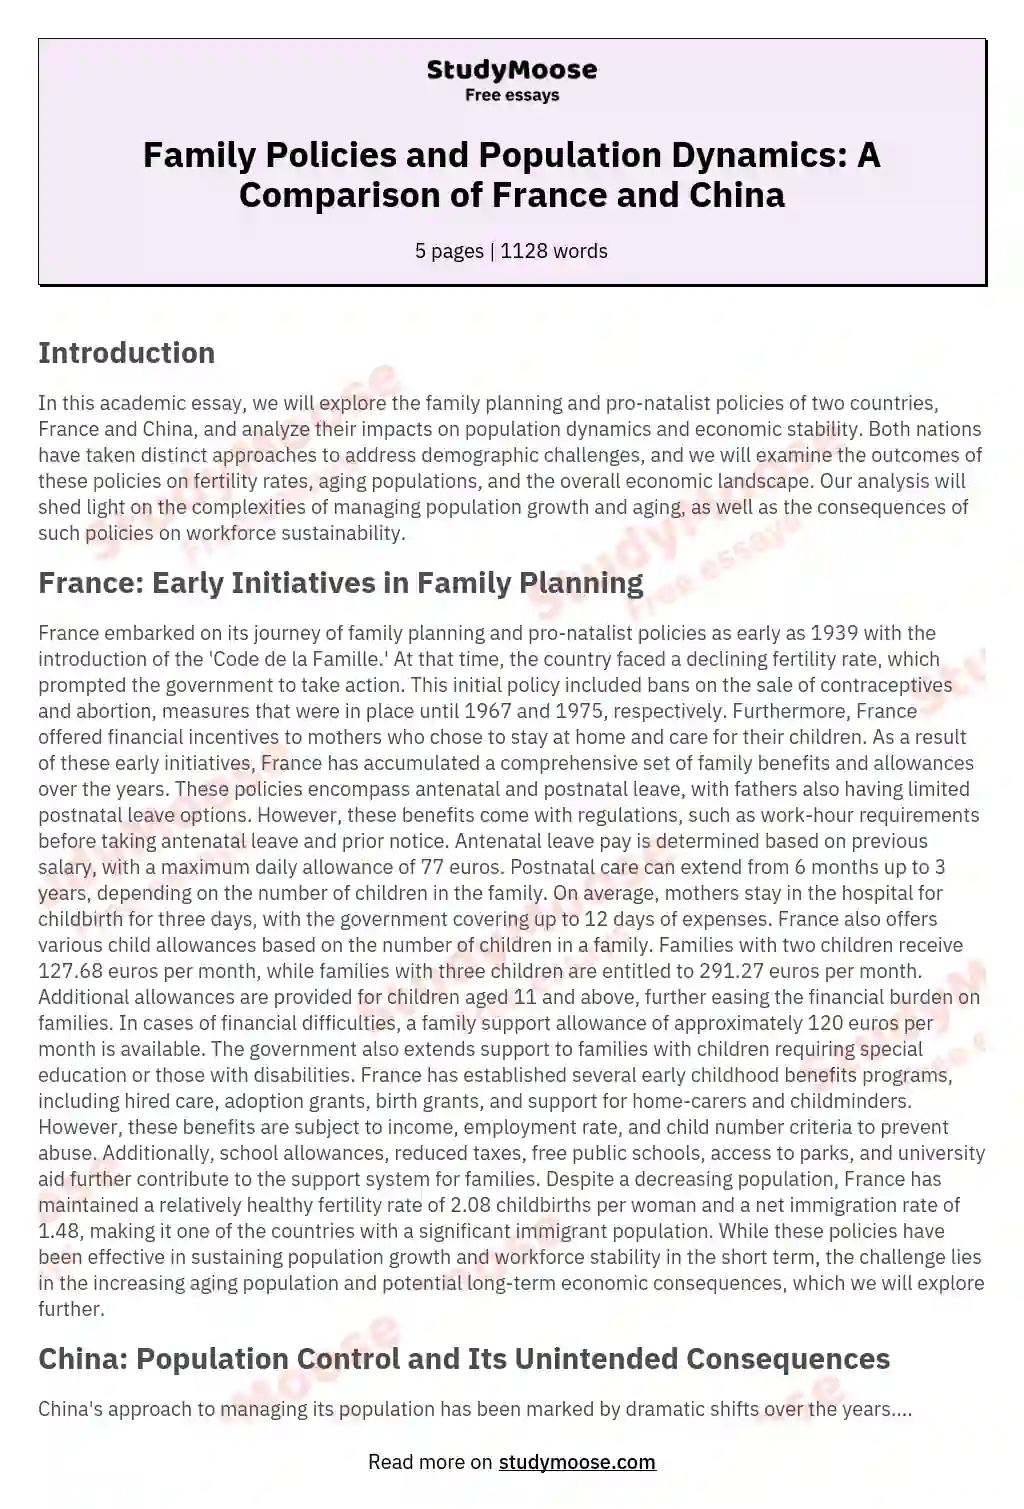 Family Policies and Population Dynamics: A Comparison of France and China essay